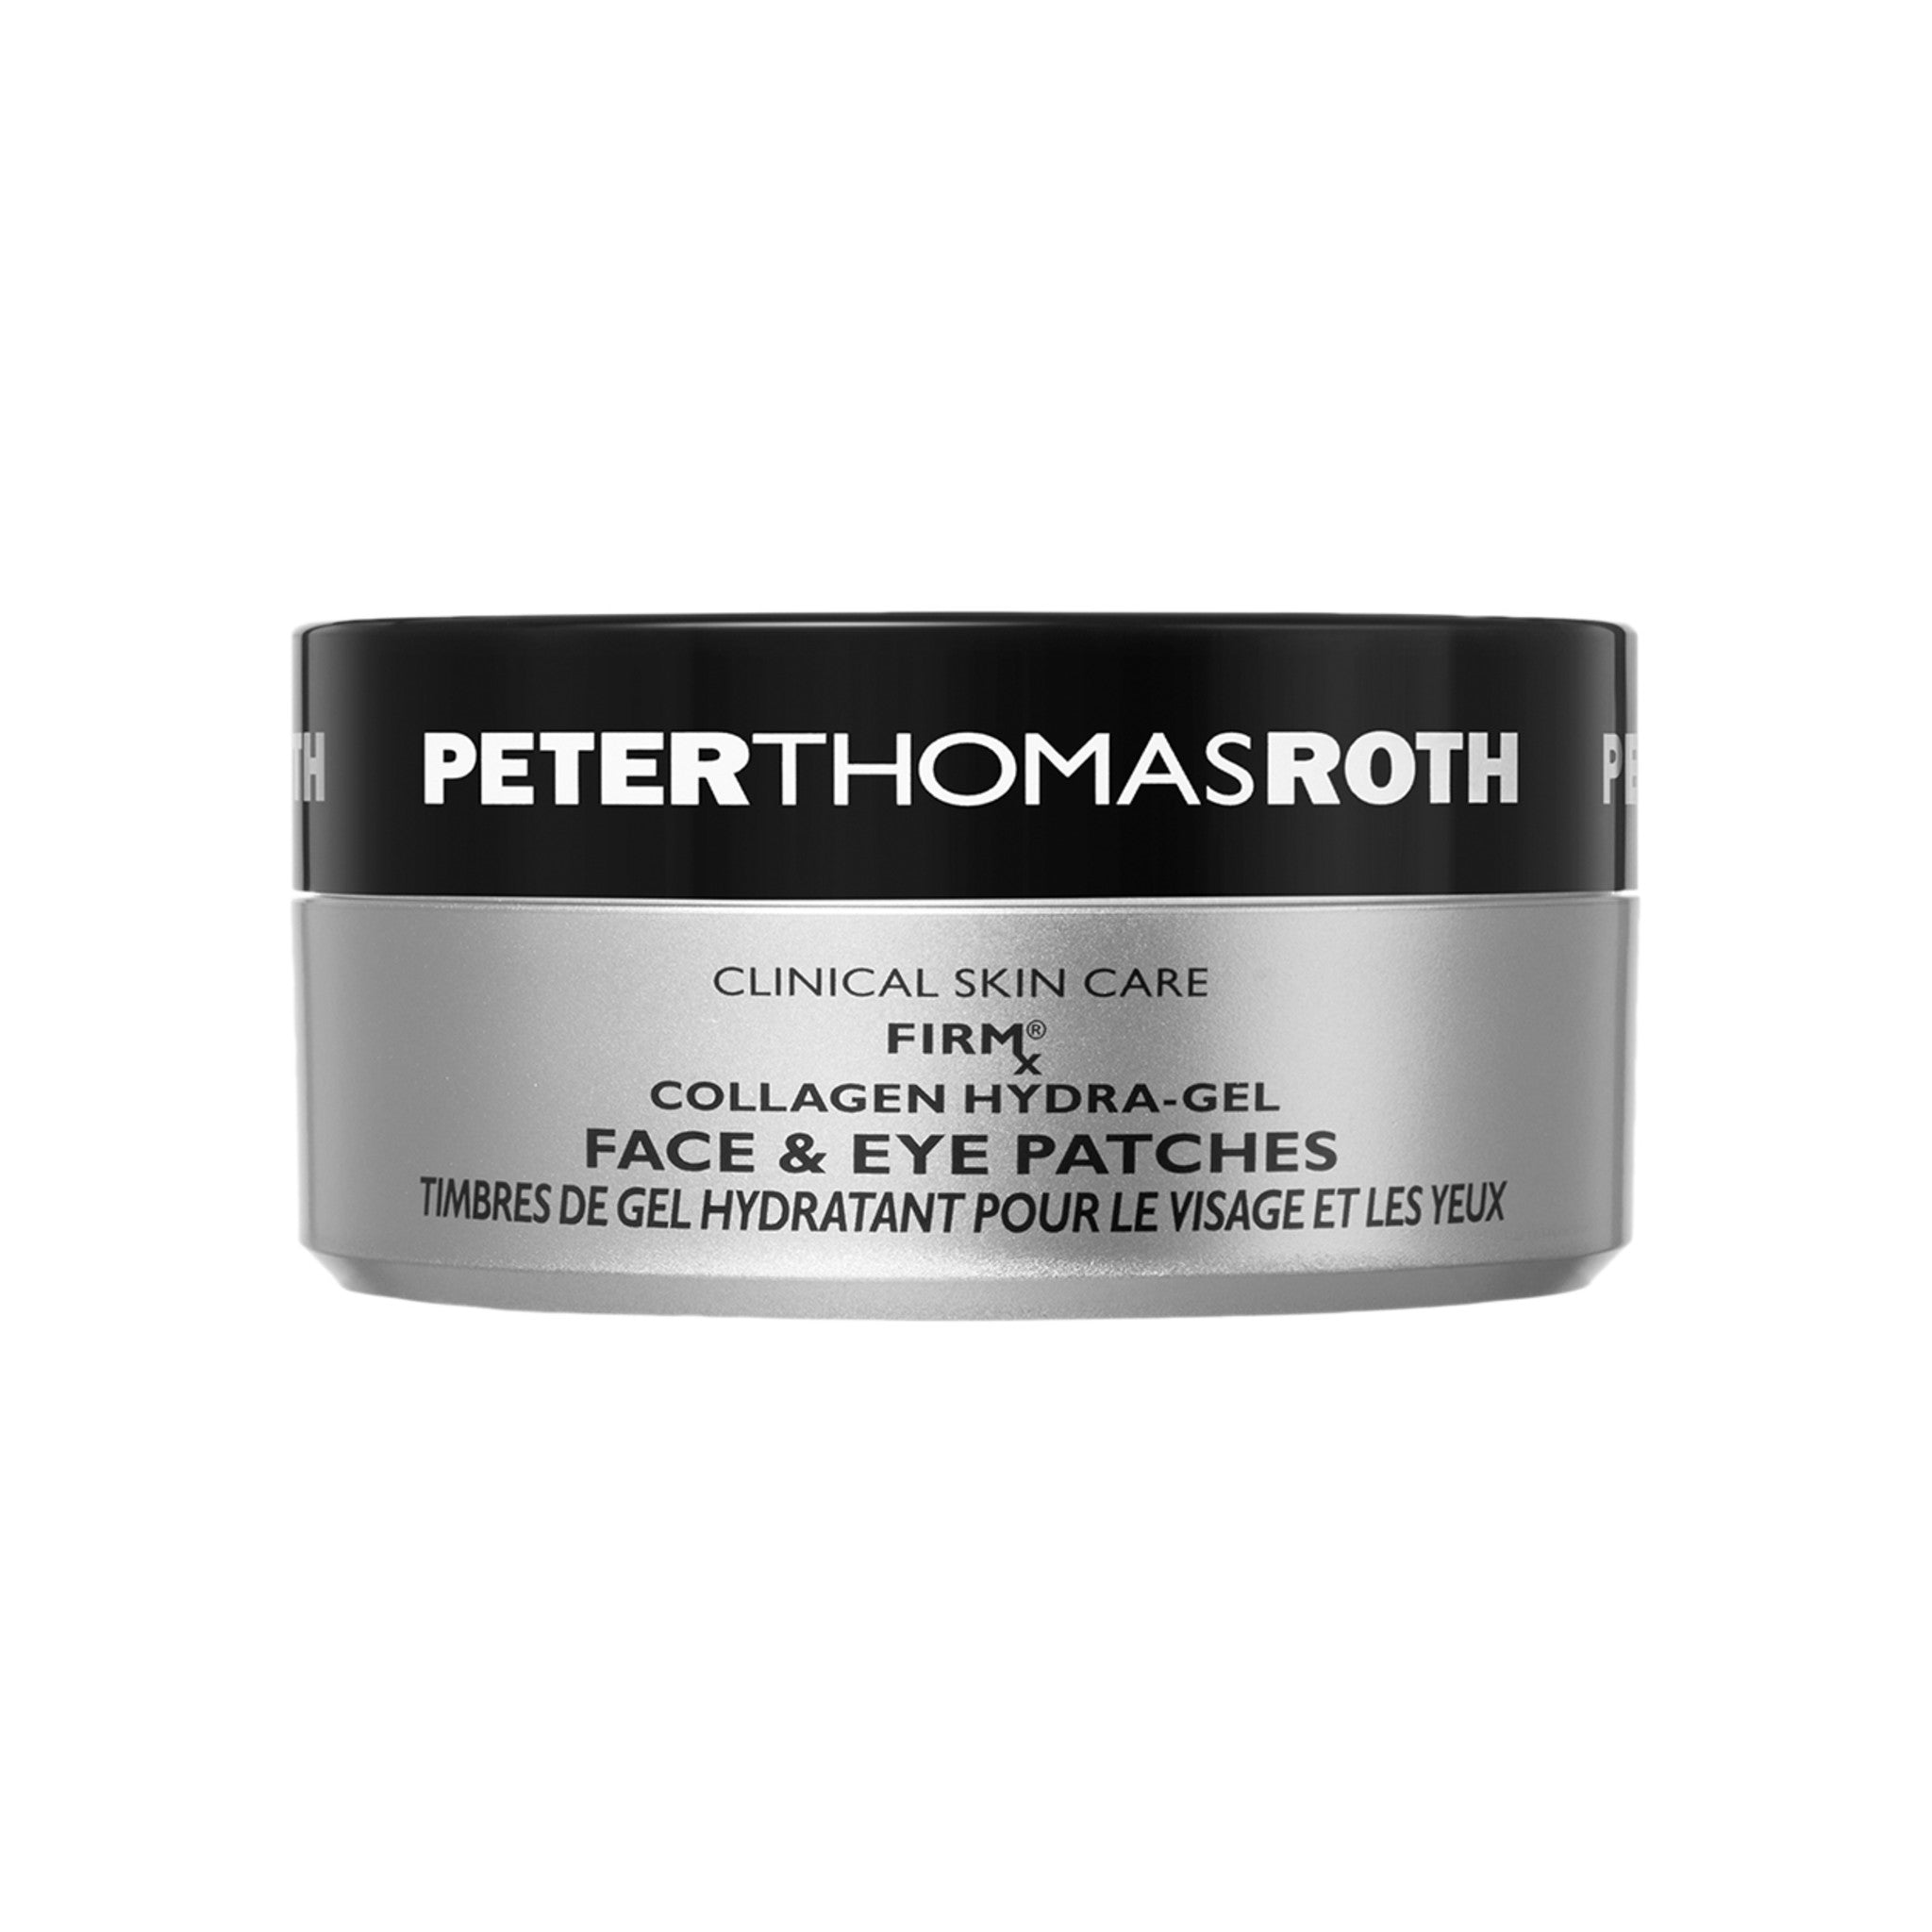 Peter Thomas Roth FirmX Collagen Hydra-Gel Face and Eye Patches main image.